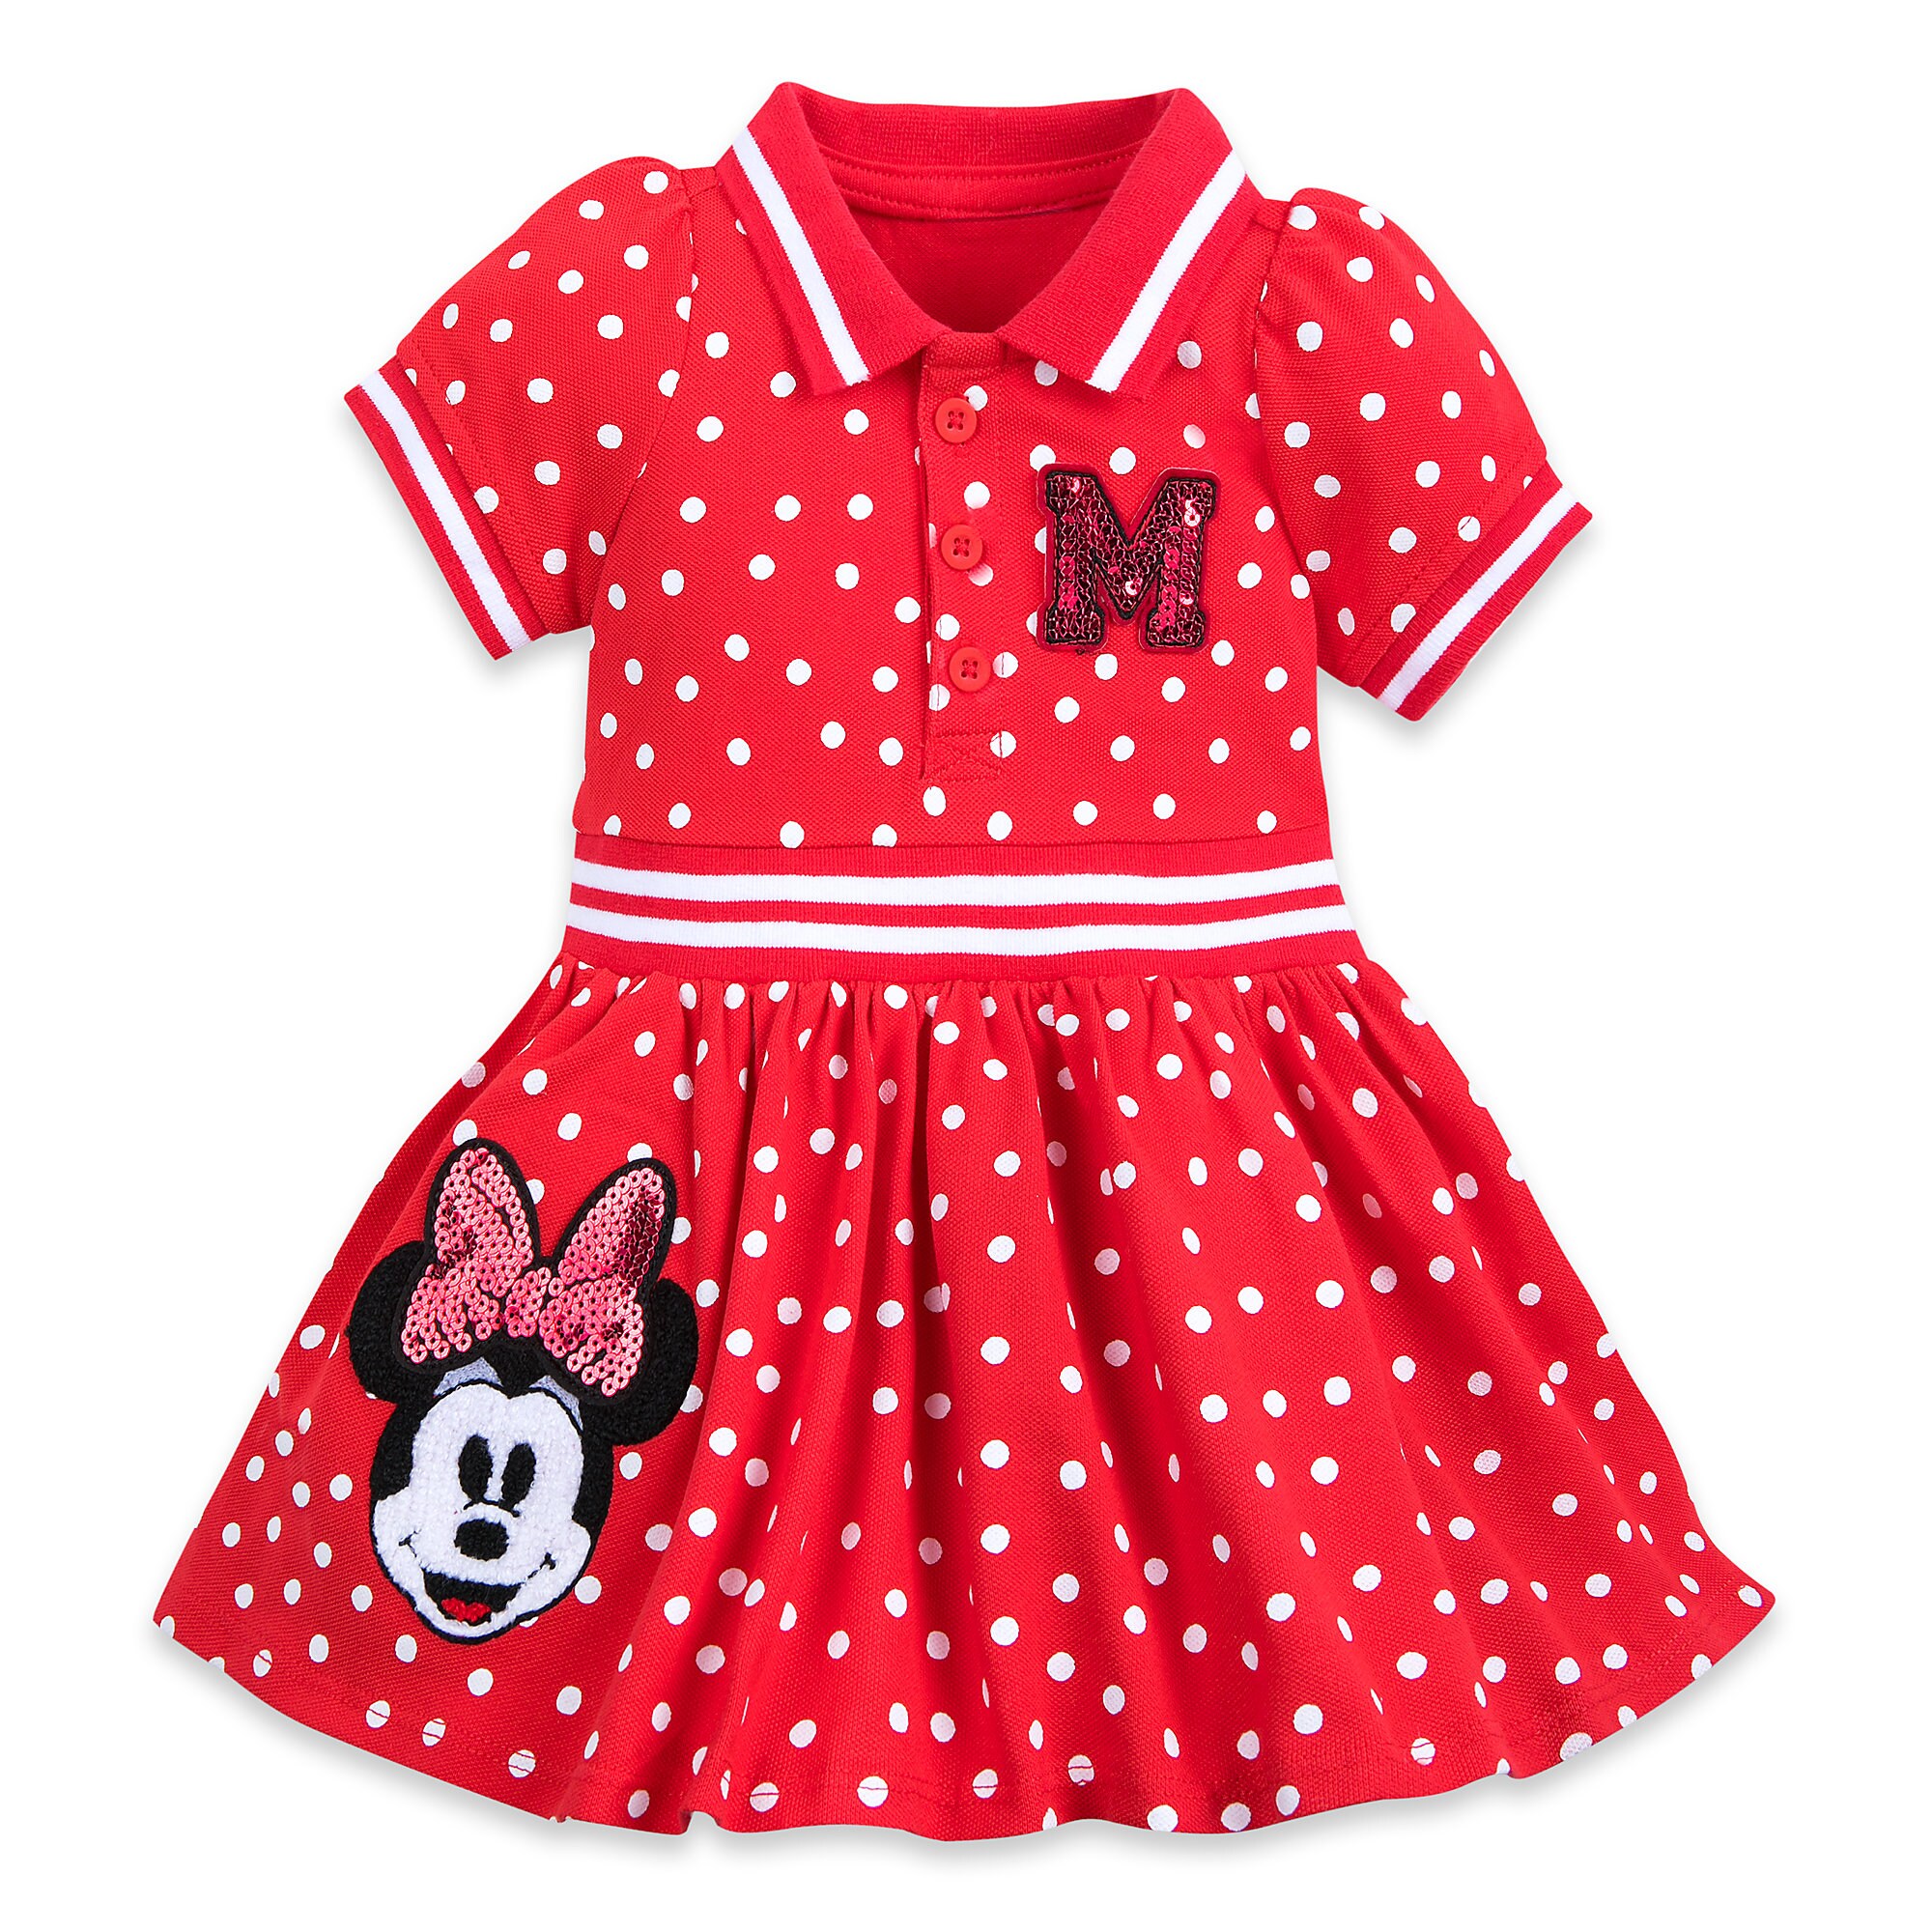 Minnie Mouse Red Polka Dot Dress for Baby